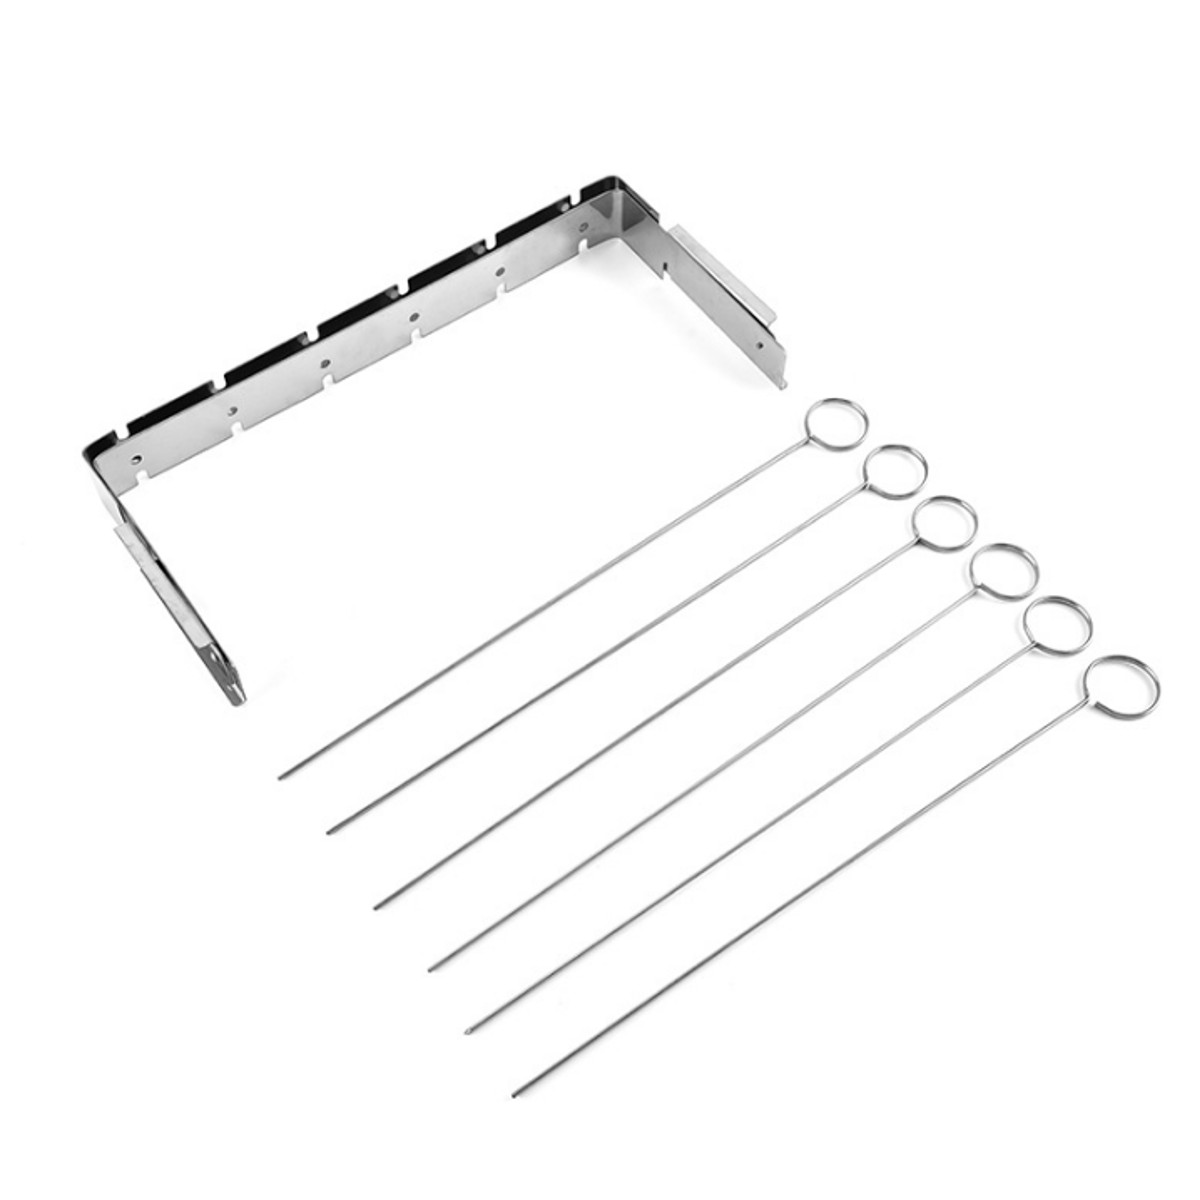 Portable-Barbecue-BBQ-Rack-Stainless-Steel-Skewer-Meat-Foods-Grill-Camping-Tool-1753748-8